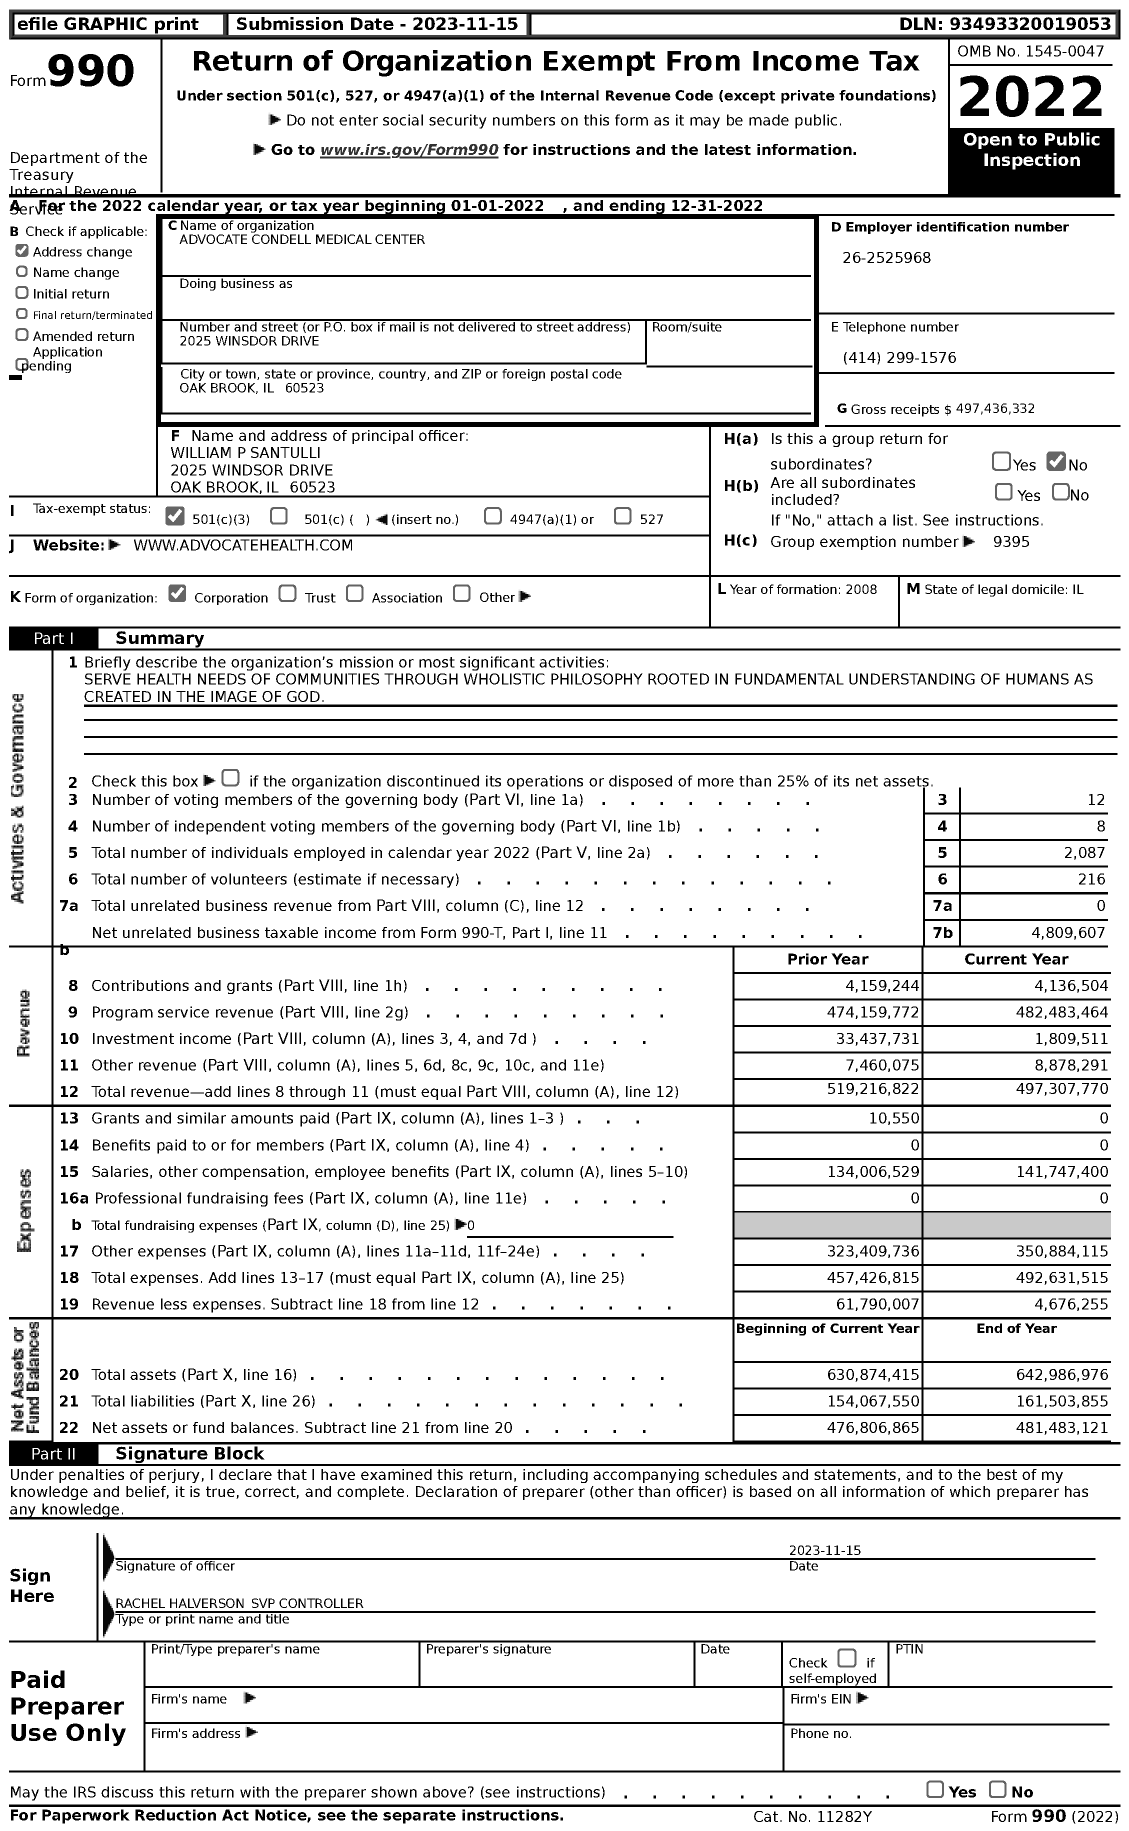 Image of first page of 2022 Form 990 for Advocate Condell Medical Center